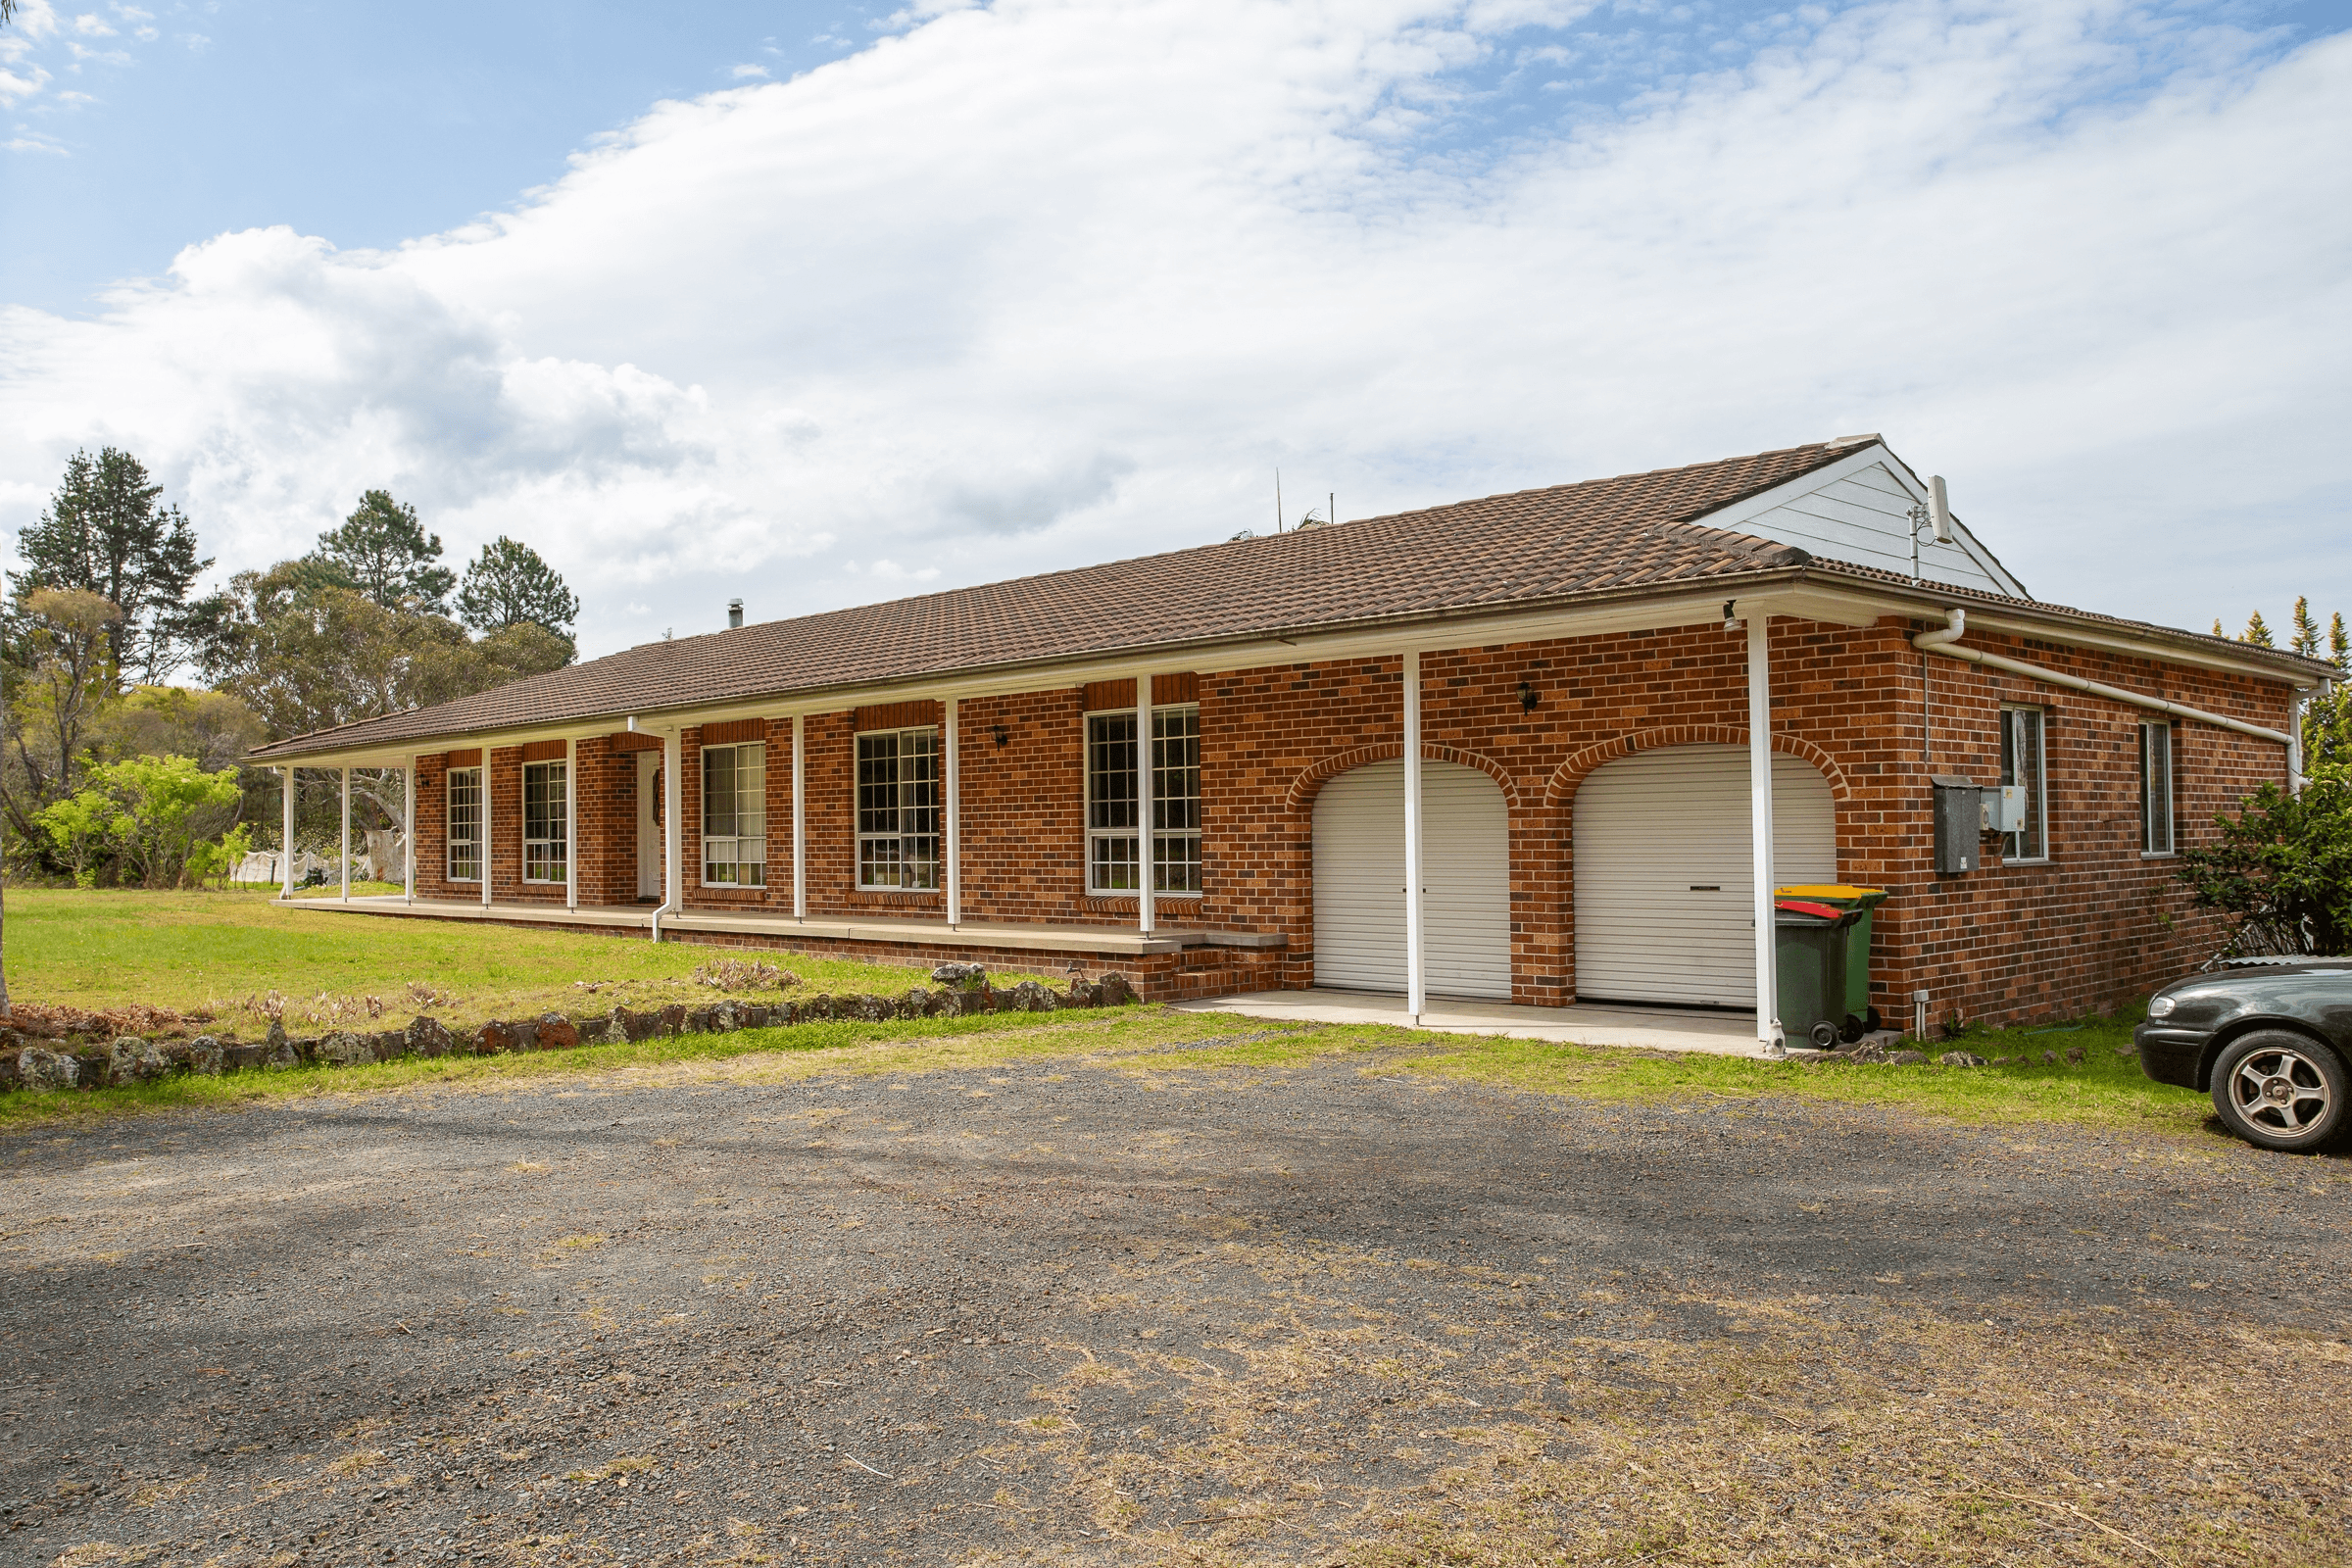 900 Wisemans Ferry Road, Somersby, NSW 2250